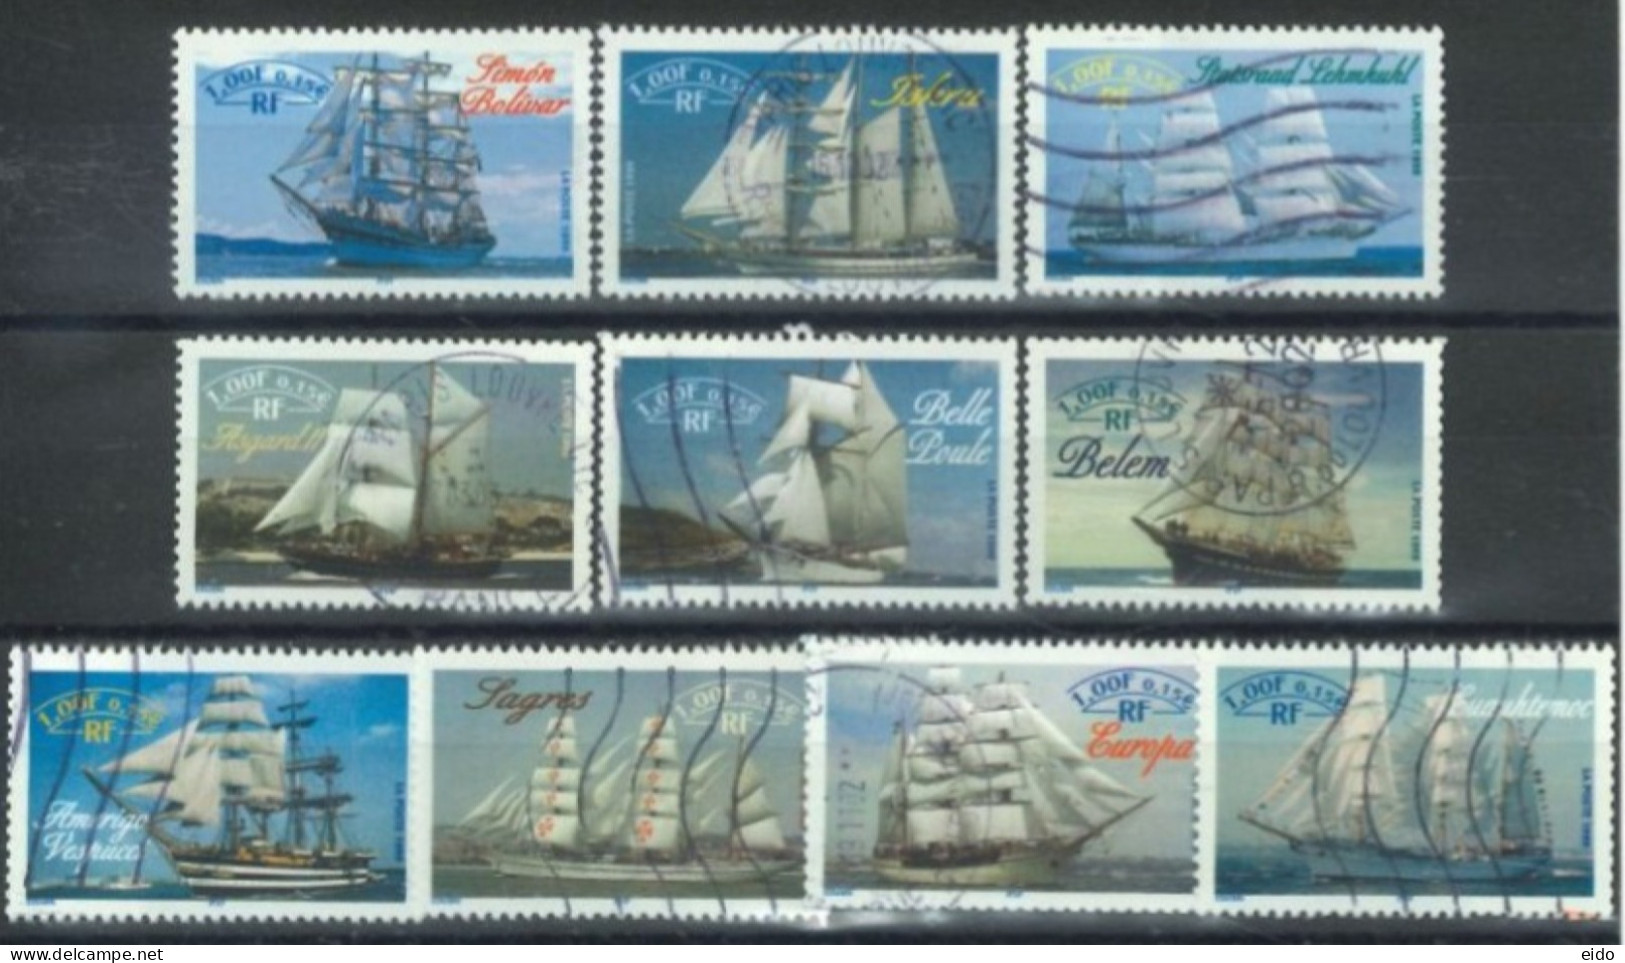 FRANCE -1999 - (YOUTH COLLECTION) ARMADA OF THE CENTURY STAMPS COMPLETE SET OF 10,  # 3269/78, USED - Oblitérés